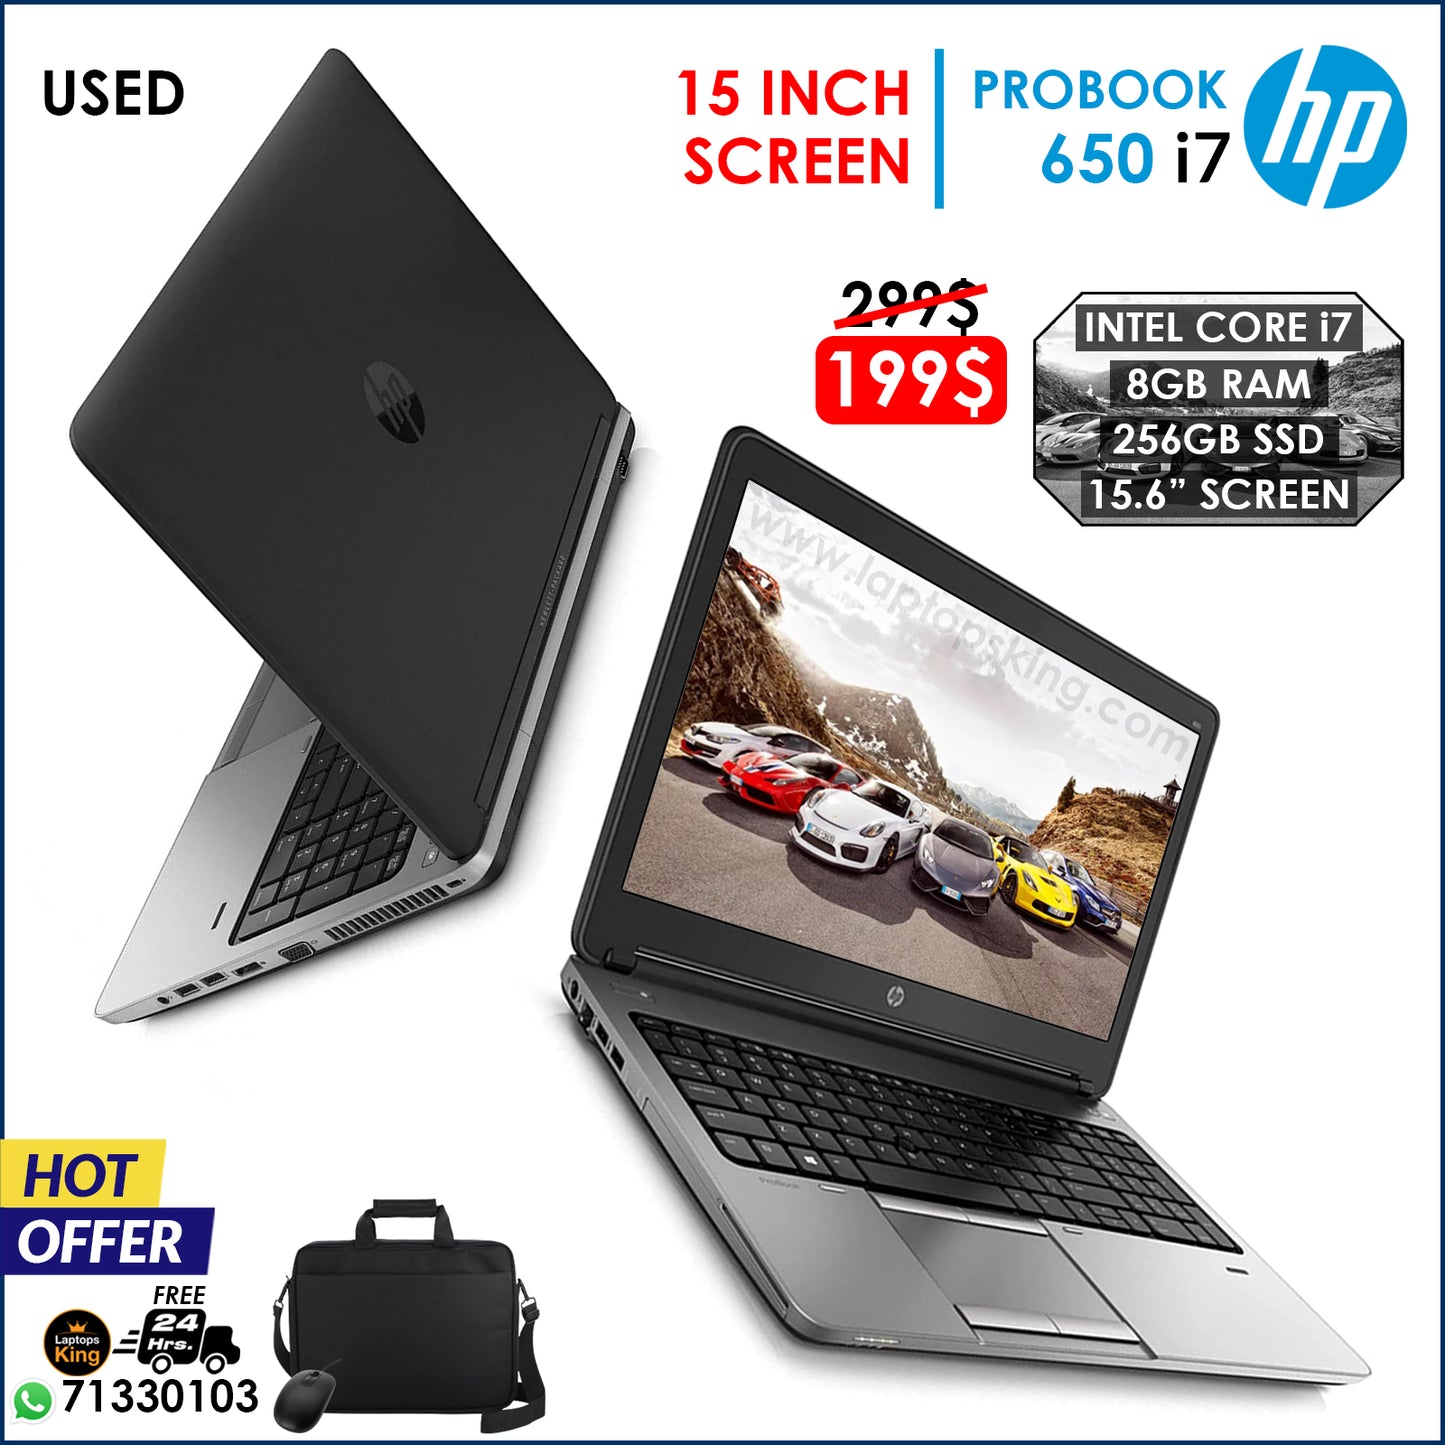 HP ProBook 650 Core i7 15-inch Laptop Offer (Used With Warranty)